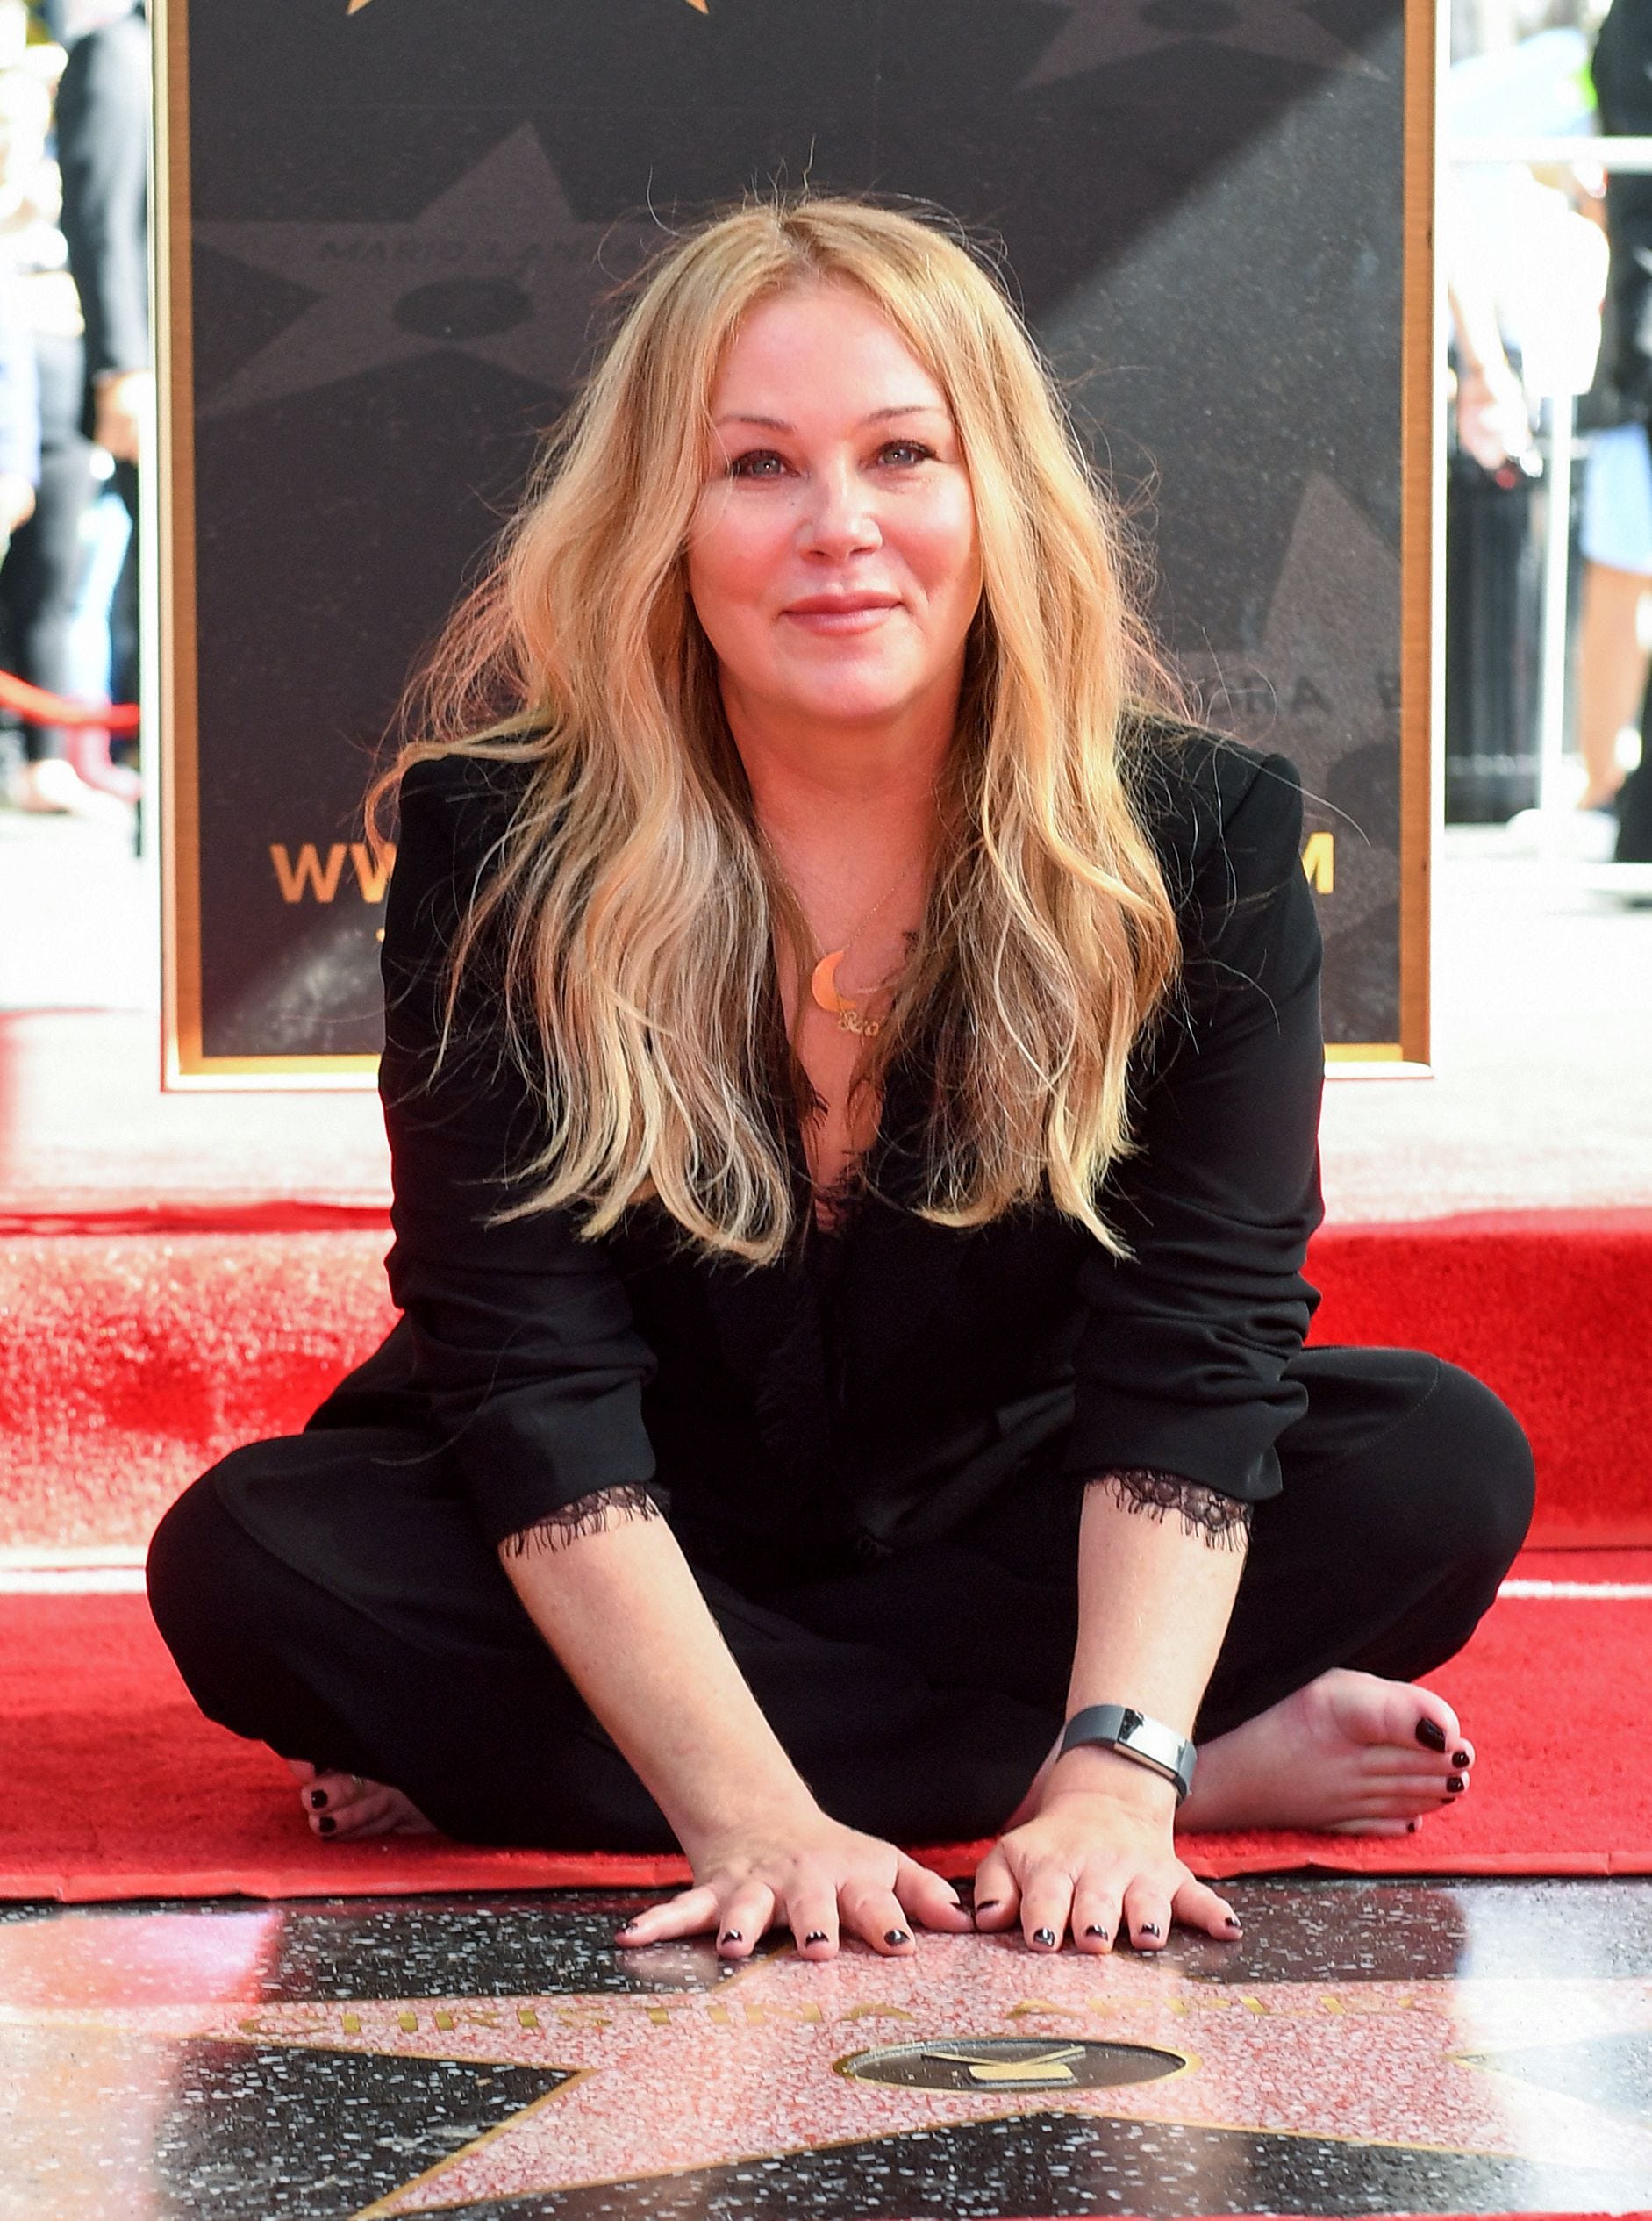 "Dead to Me" star Christina Applegate <a href="https://www.usatoday.com/story/entertainment/celebrities/2022/11/13/christina-applegate-last-role-dead-to-me-multiple-sclerosis/10691202002/">received her star on Nov. 14, 2022</a>. It was her first public appearance since she revealed her multiple sclerosis diagnosis.